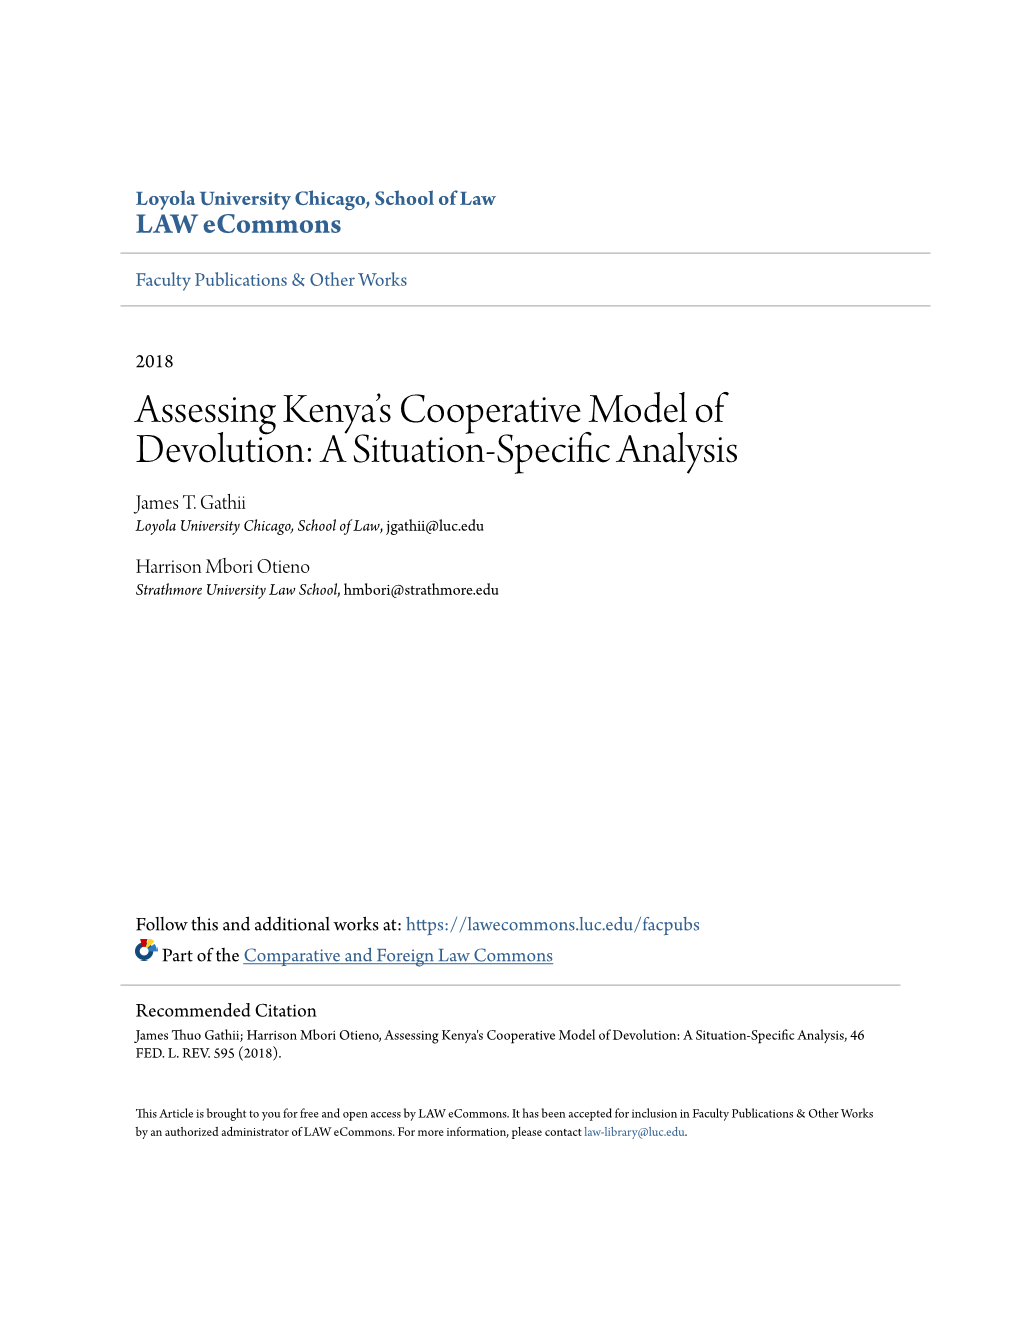 Assessing Kenya's Cooperative Model of Devolution: a Situation-Specific Analysis, 46 FED